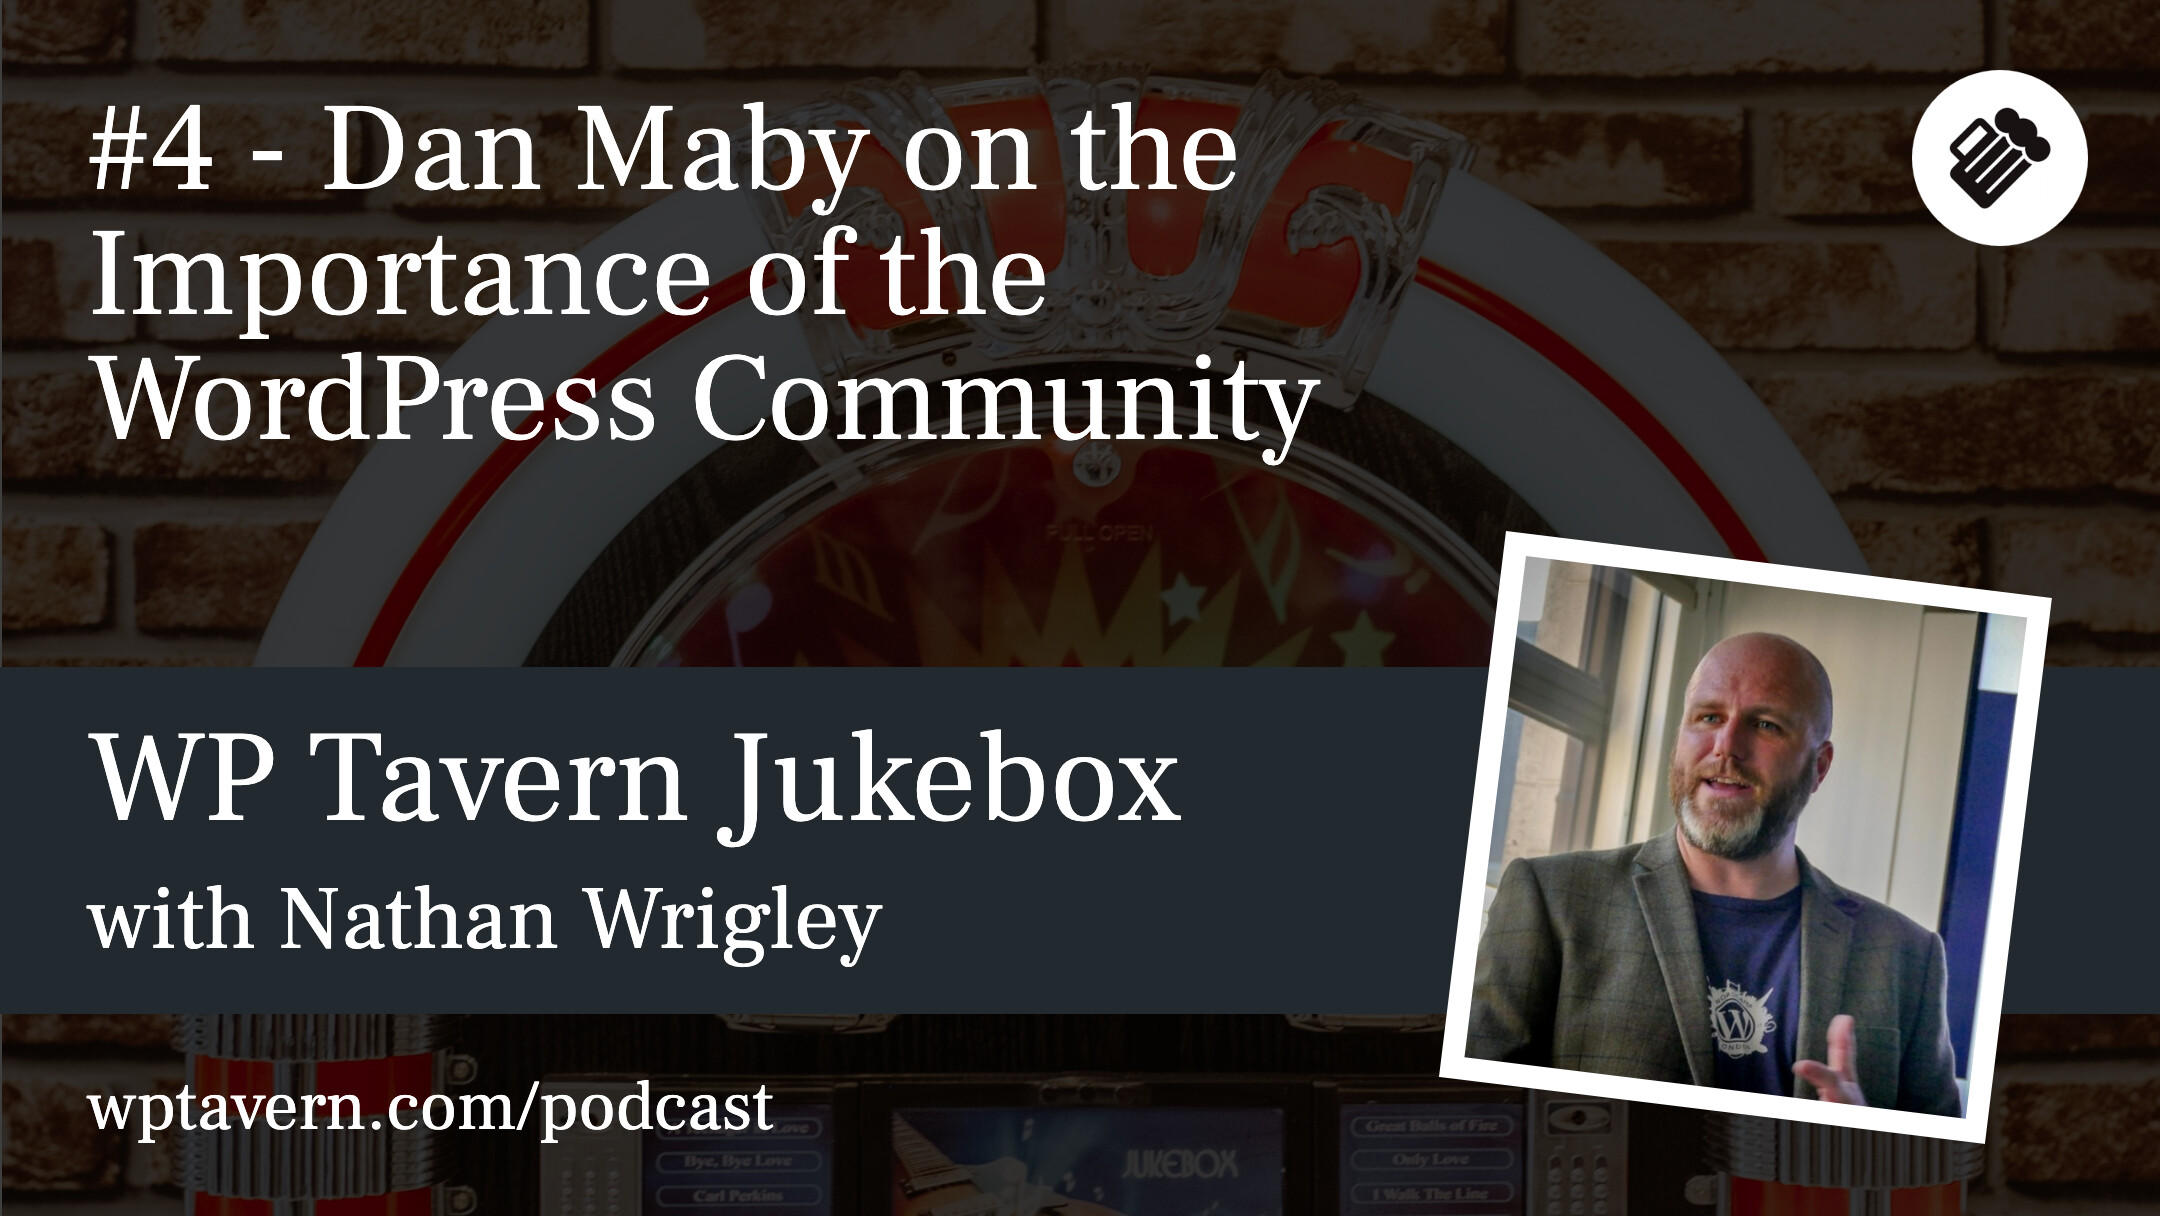 #4 – Dan Maby on the Importance of the WordPress Community